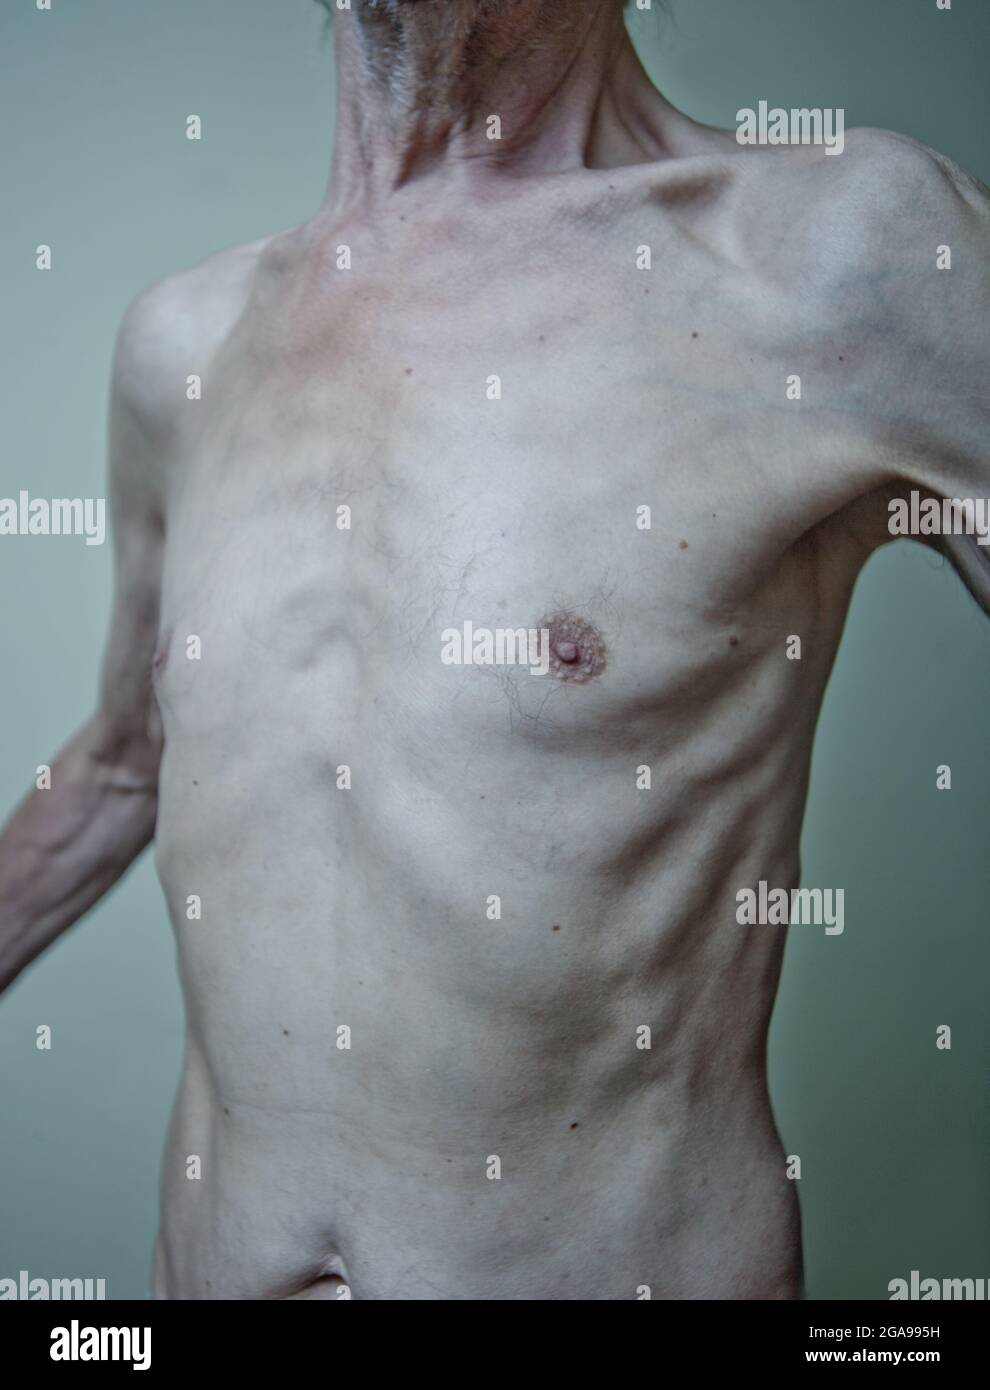 https://c8.alamy.com/comp/2GA995H/chest-and-skin-of-a-skinny-old-man-thin-upper-body-and-armpit-with-close-up-of-dry-skin-old-age-2GA995H.jpg